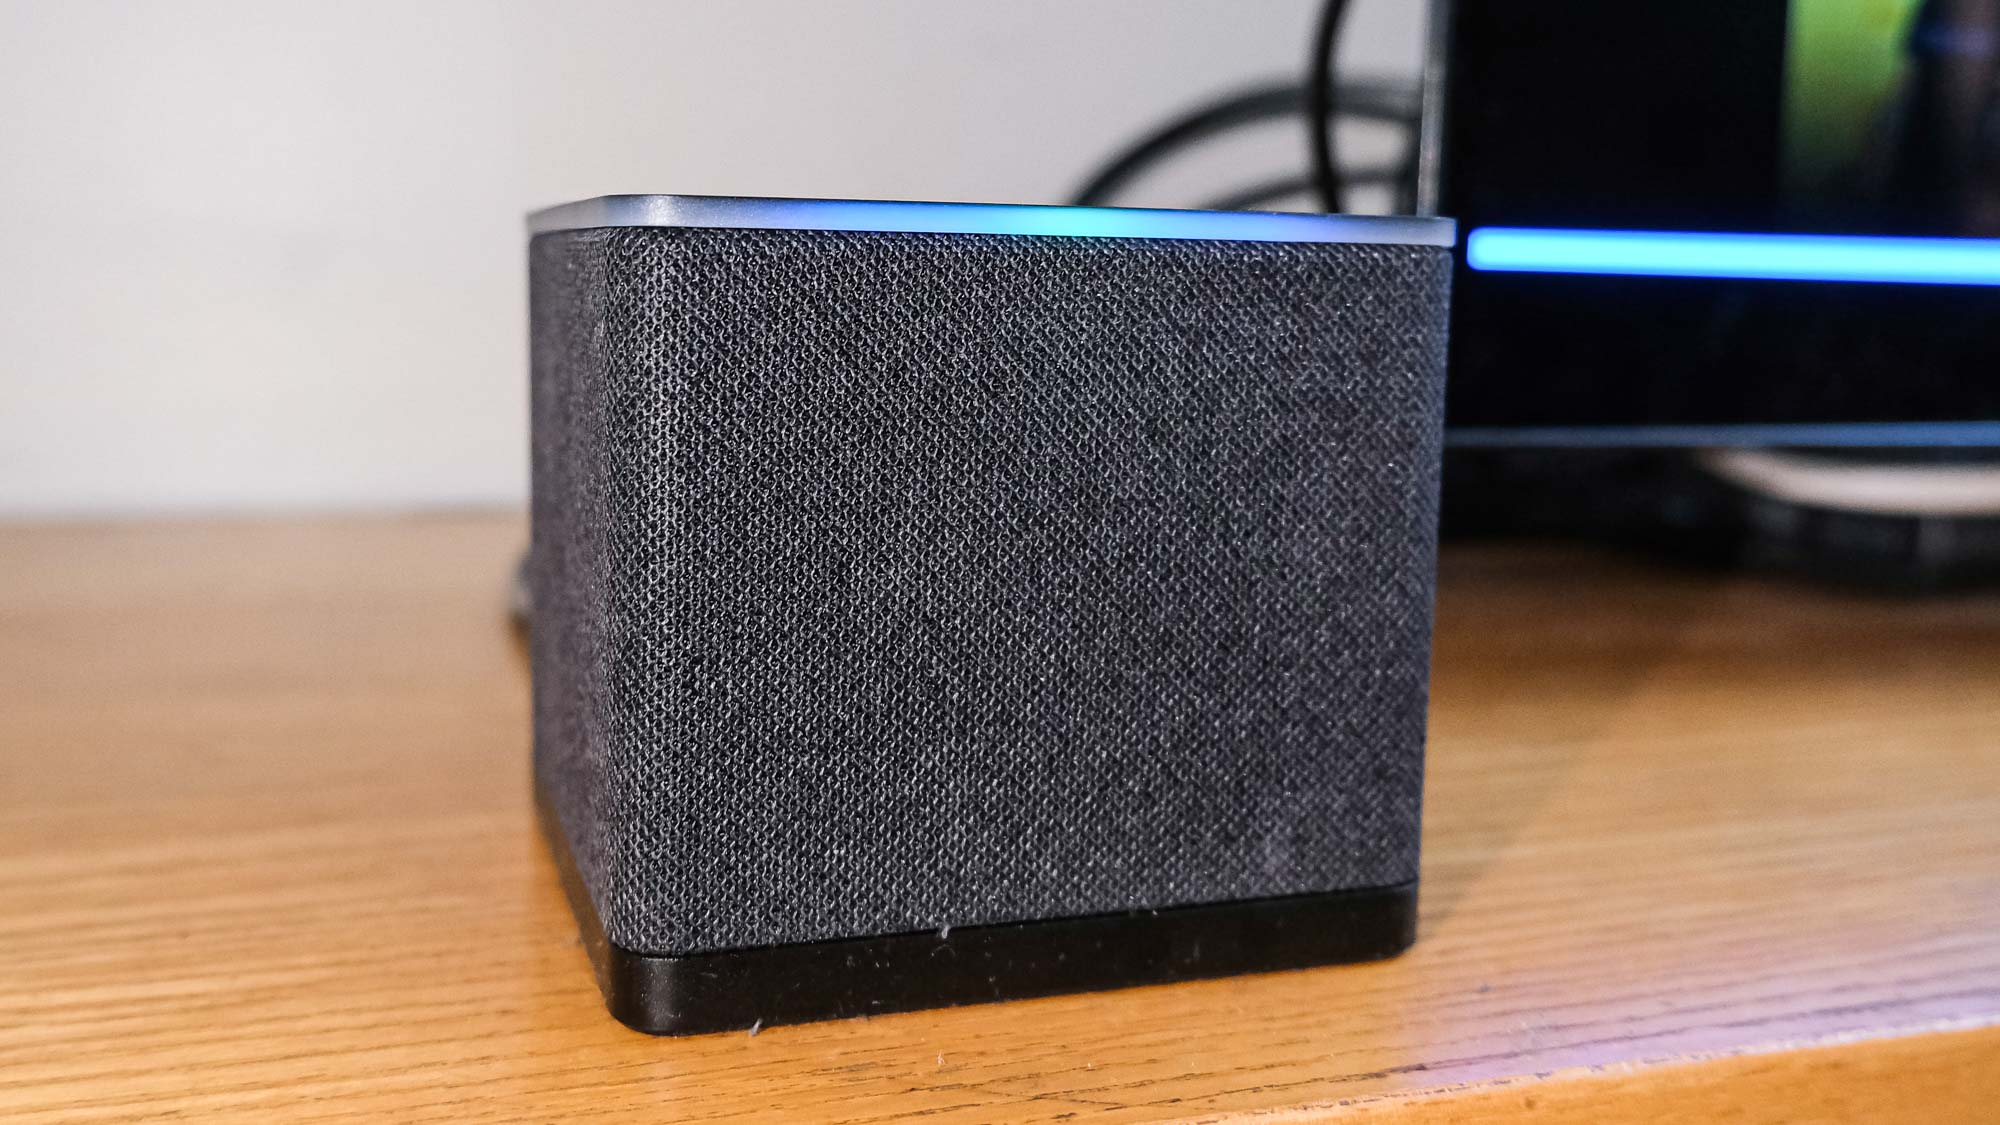 Fire TV Cube (3rd Gen) Review  4K Streamer with Alexa voice control  